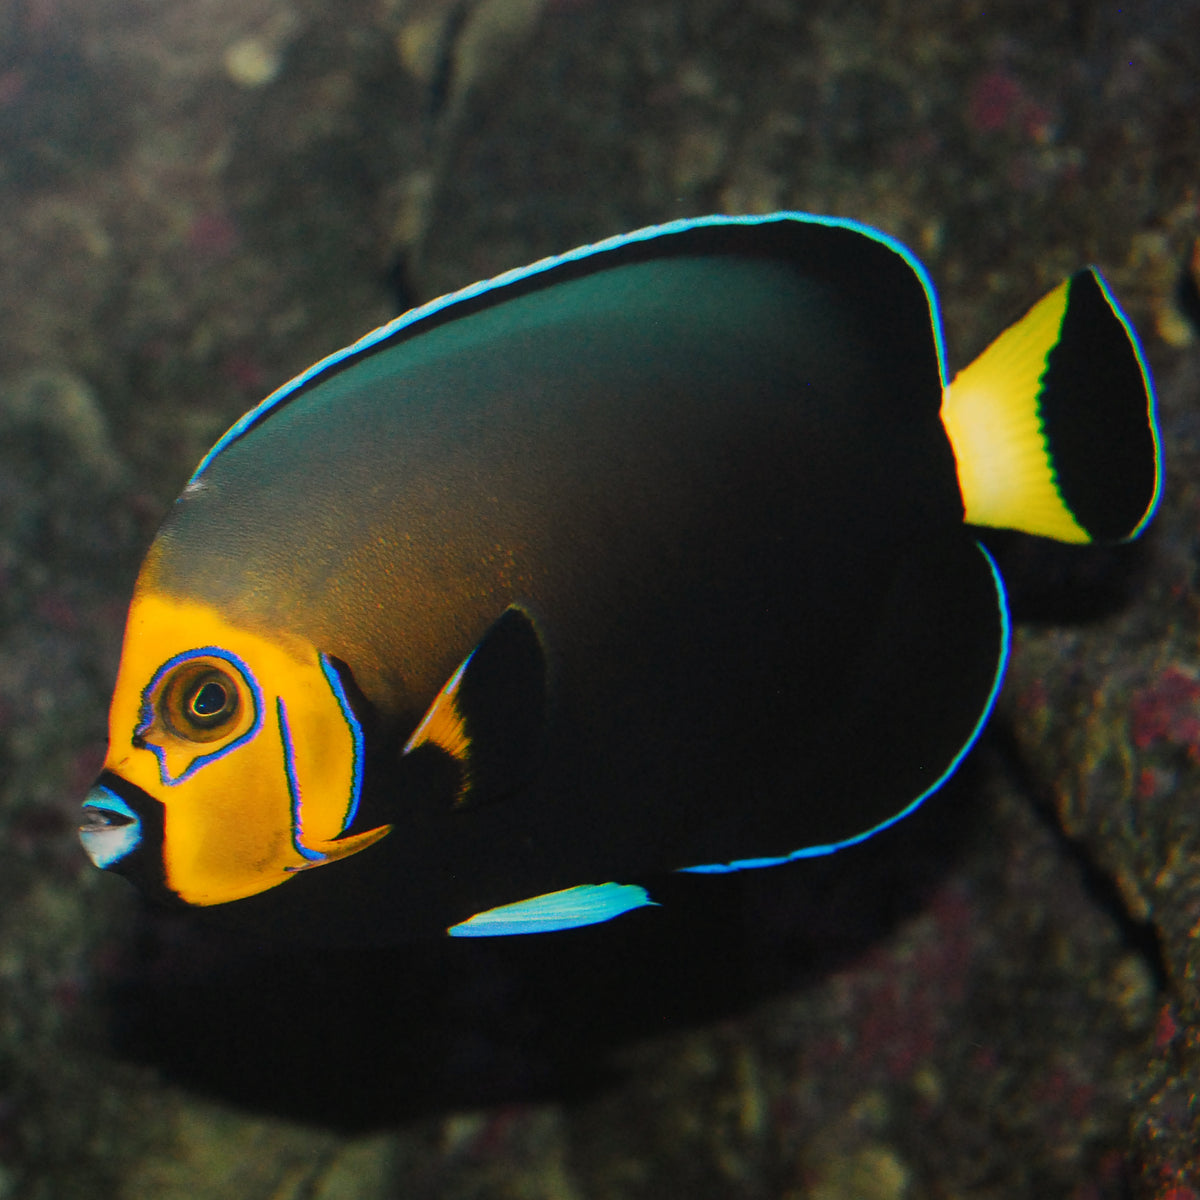 Conspicuous Angelfish